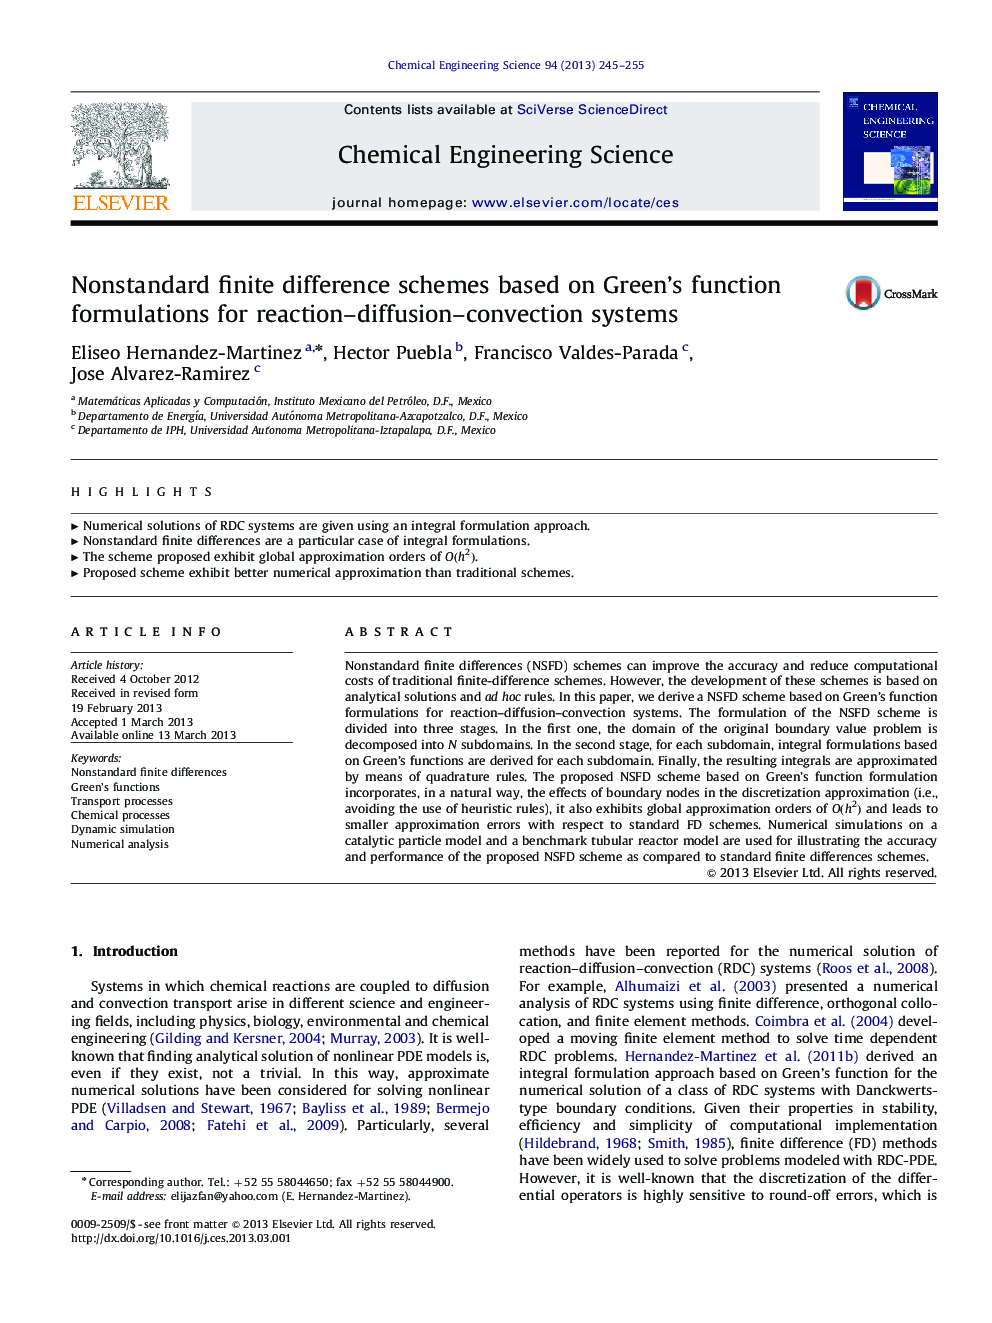 Nonstandard finite difference schemes based on Green's function formulations for reaction–diffusion–convection systems